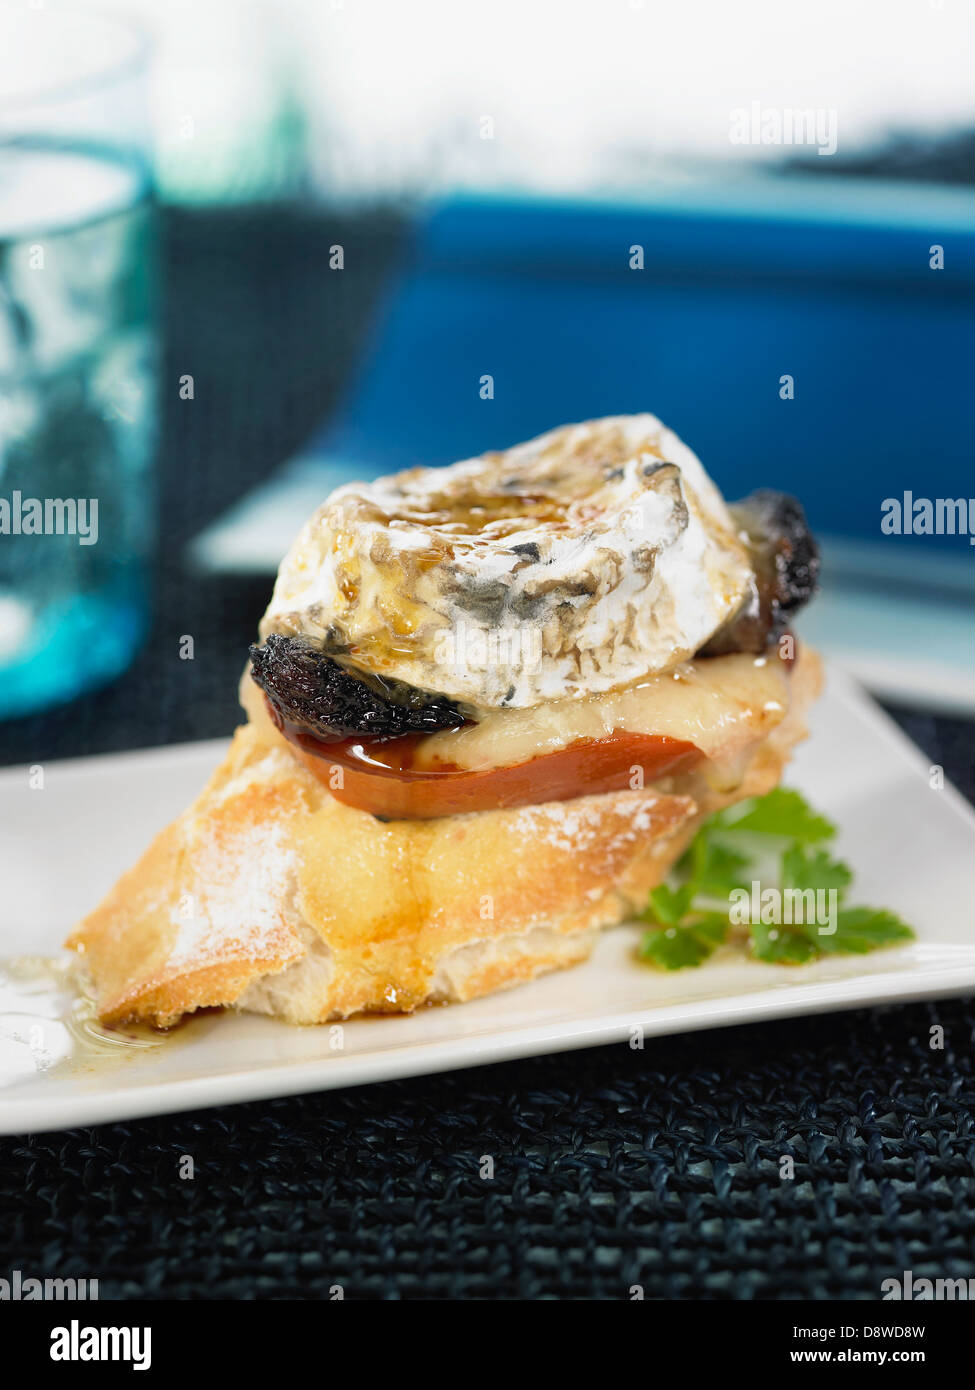 Blood sausage,goat's cheese and tomato on bread with vinaigrette Stock Photo